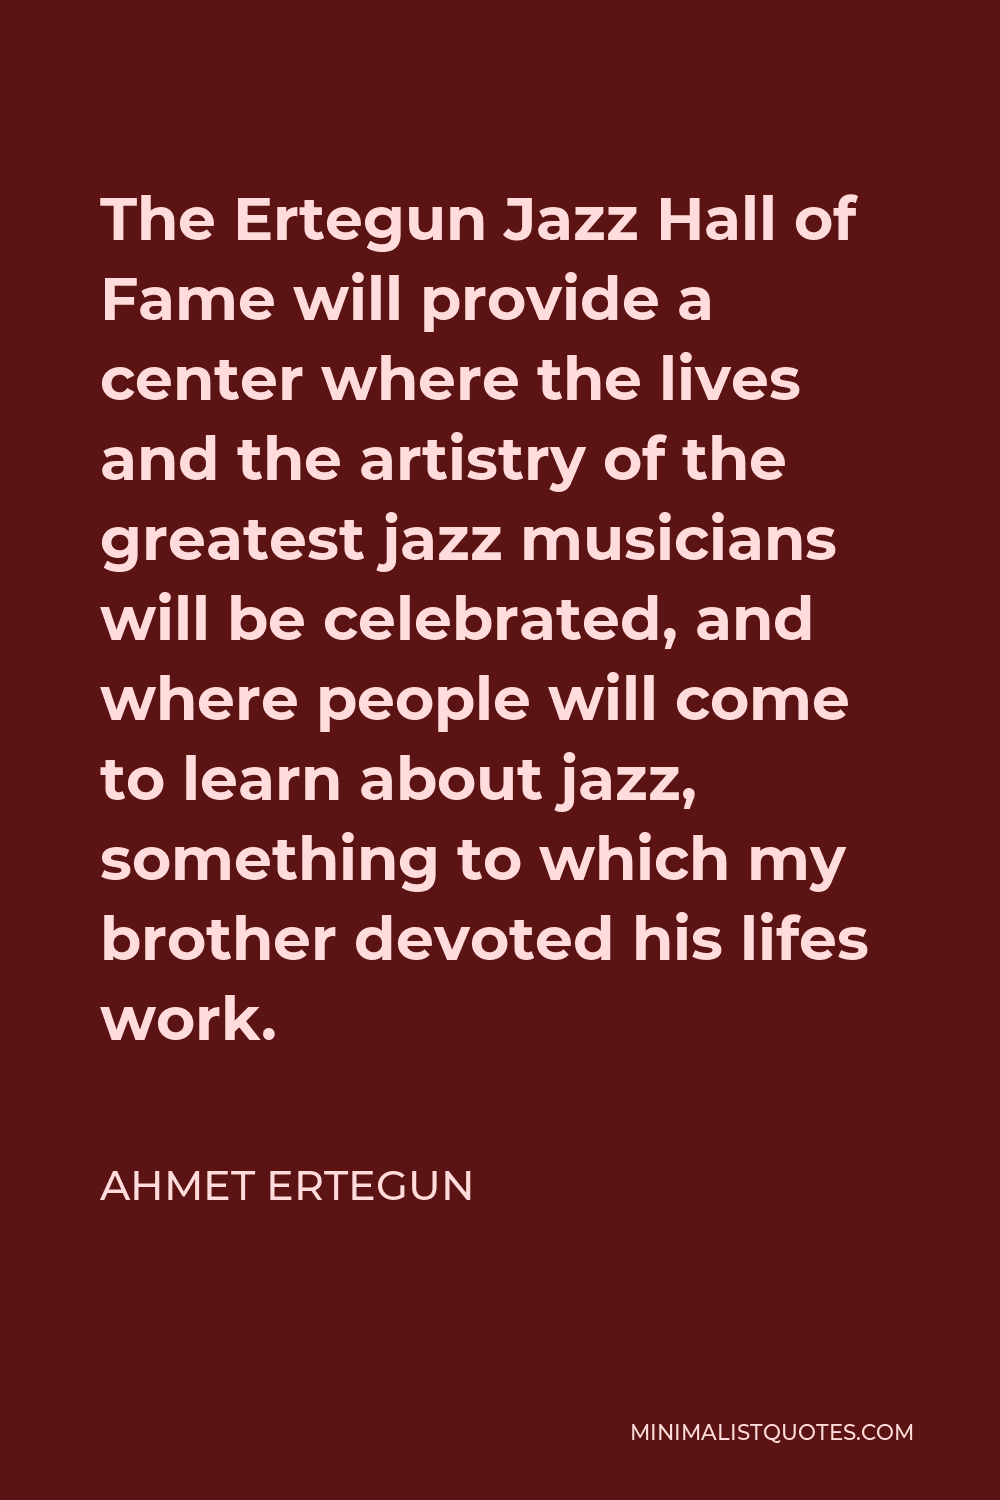 Ahmet Ertegun Quote - The Ertegun Jazz Hall of Fame will provide a center where the lives and the artistry of the greatest jazz musicians will be celebrated, and where people will come to learn about jazz, something to which my brother devoted his lifes work.